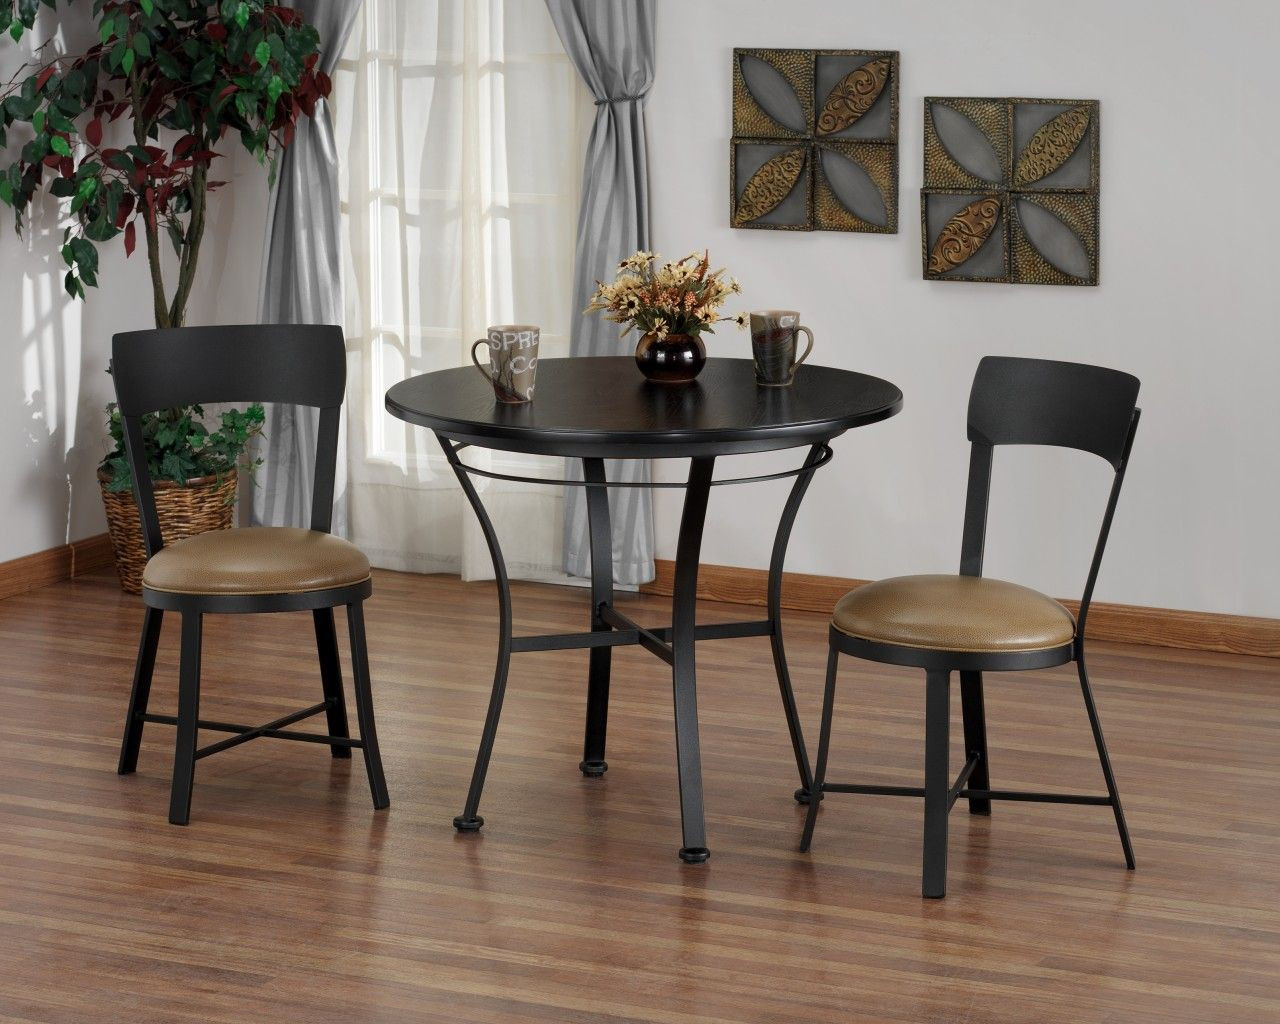 Small Bistro Tables For Kitchen
 Indoor Bistro Table and Chairs In UK